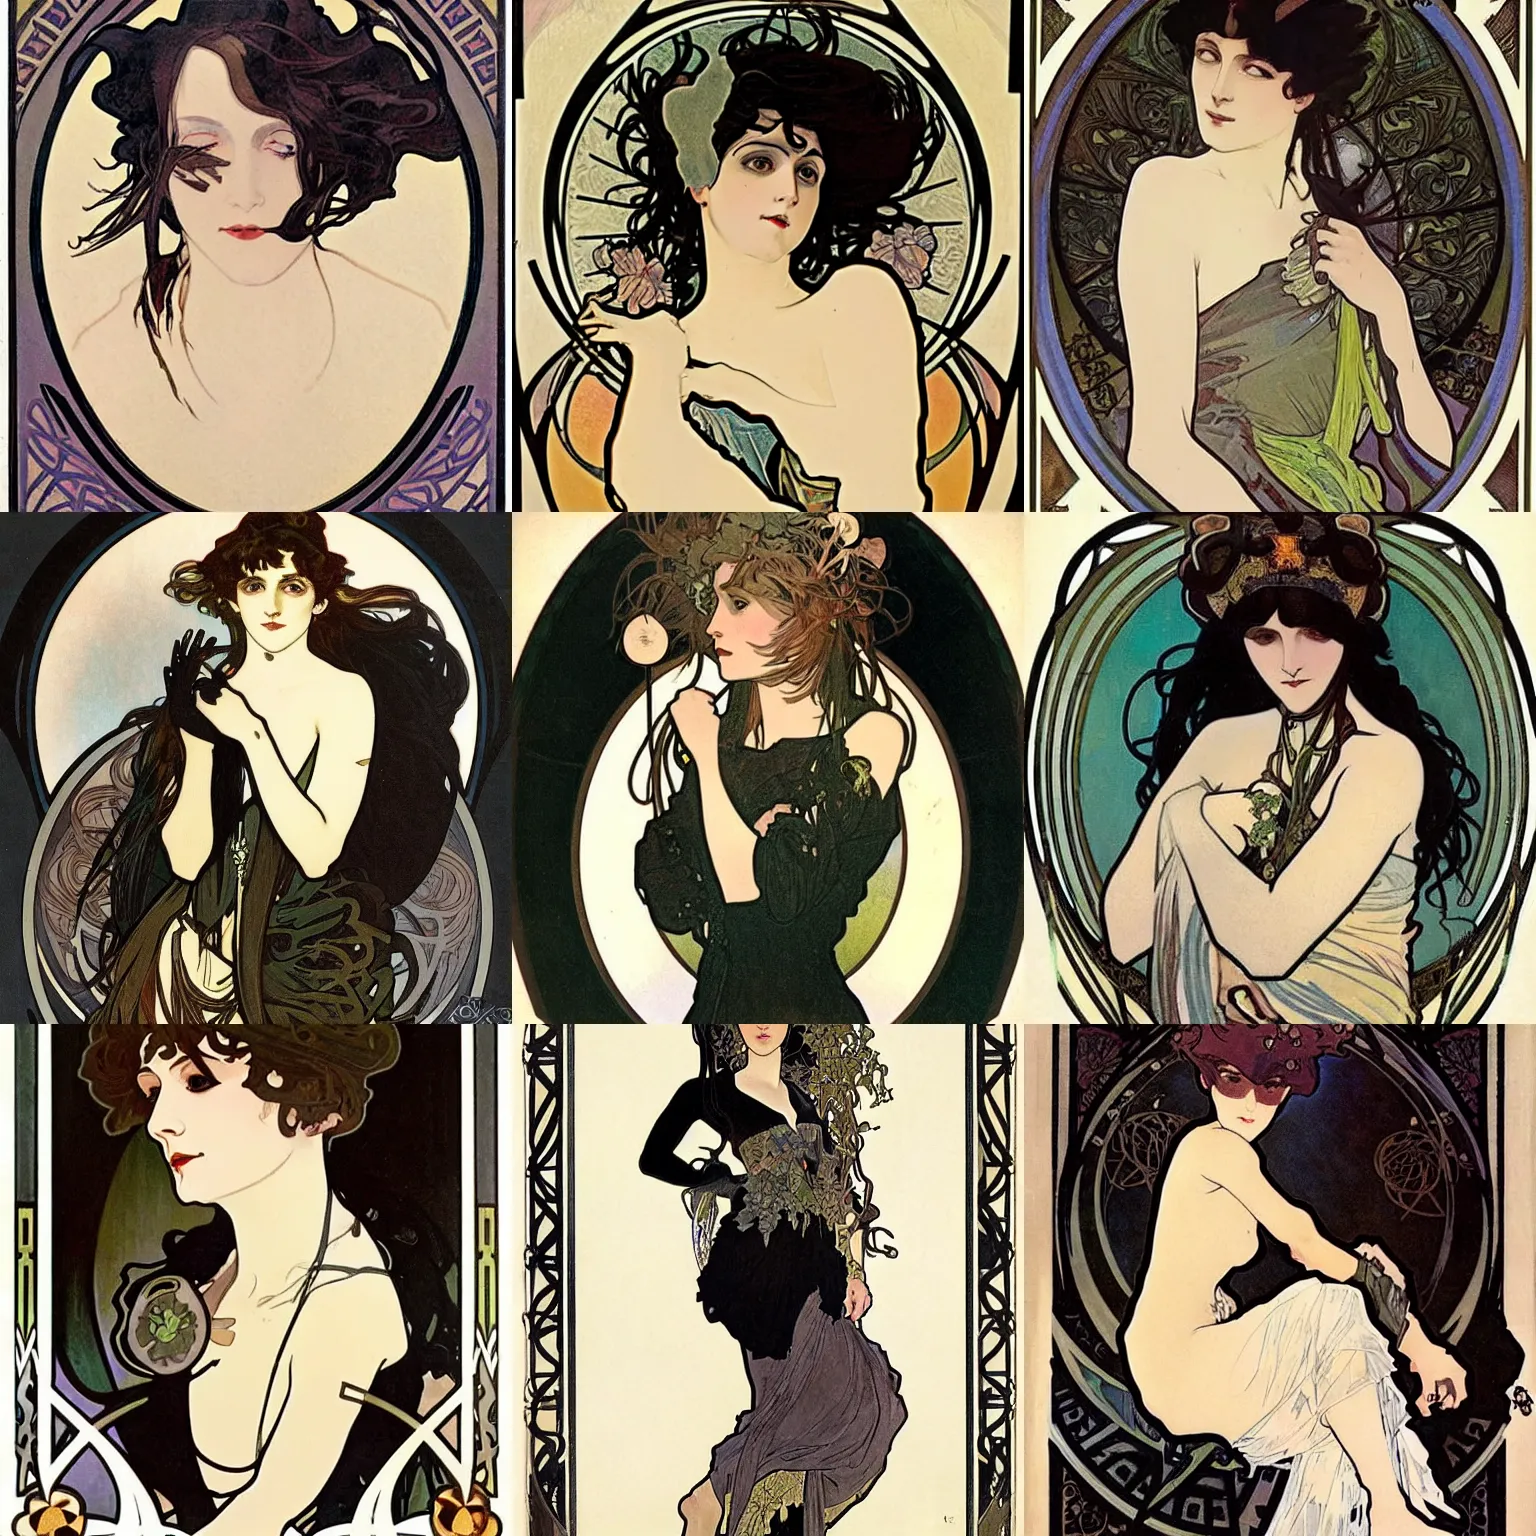 Prompt: A goth painted by Alphonse Mucha. Her hair is dark brown and cut into a short, messy pixie cut. She has a slightly rounded face, with a pointed chin, large entirely-black eyes, and a small nose. She is wearing a black tank top, a black leather jacket, a black knee-length skirt, a black choker, and black leather boots.